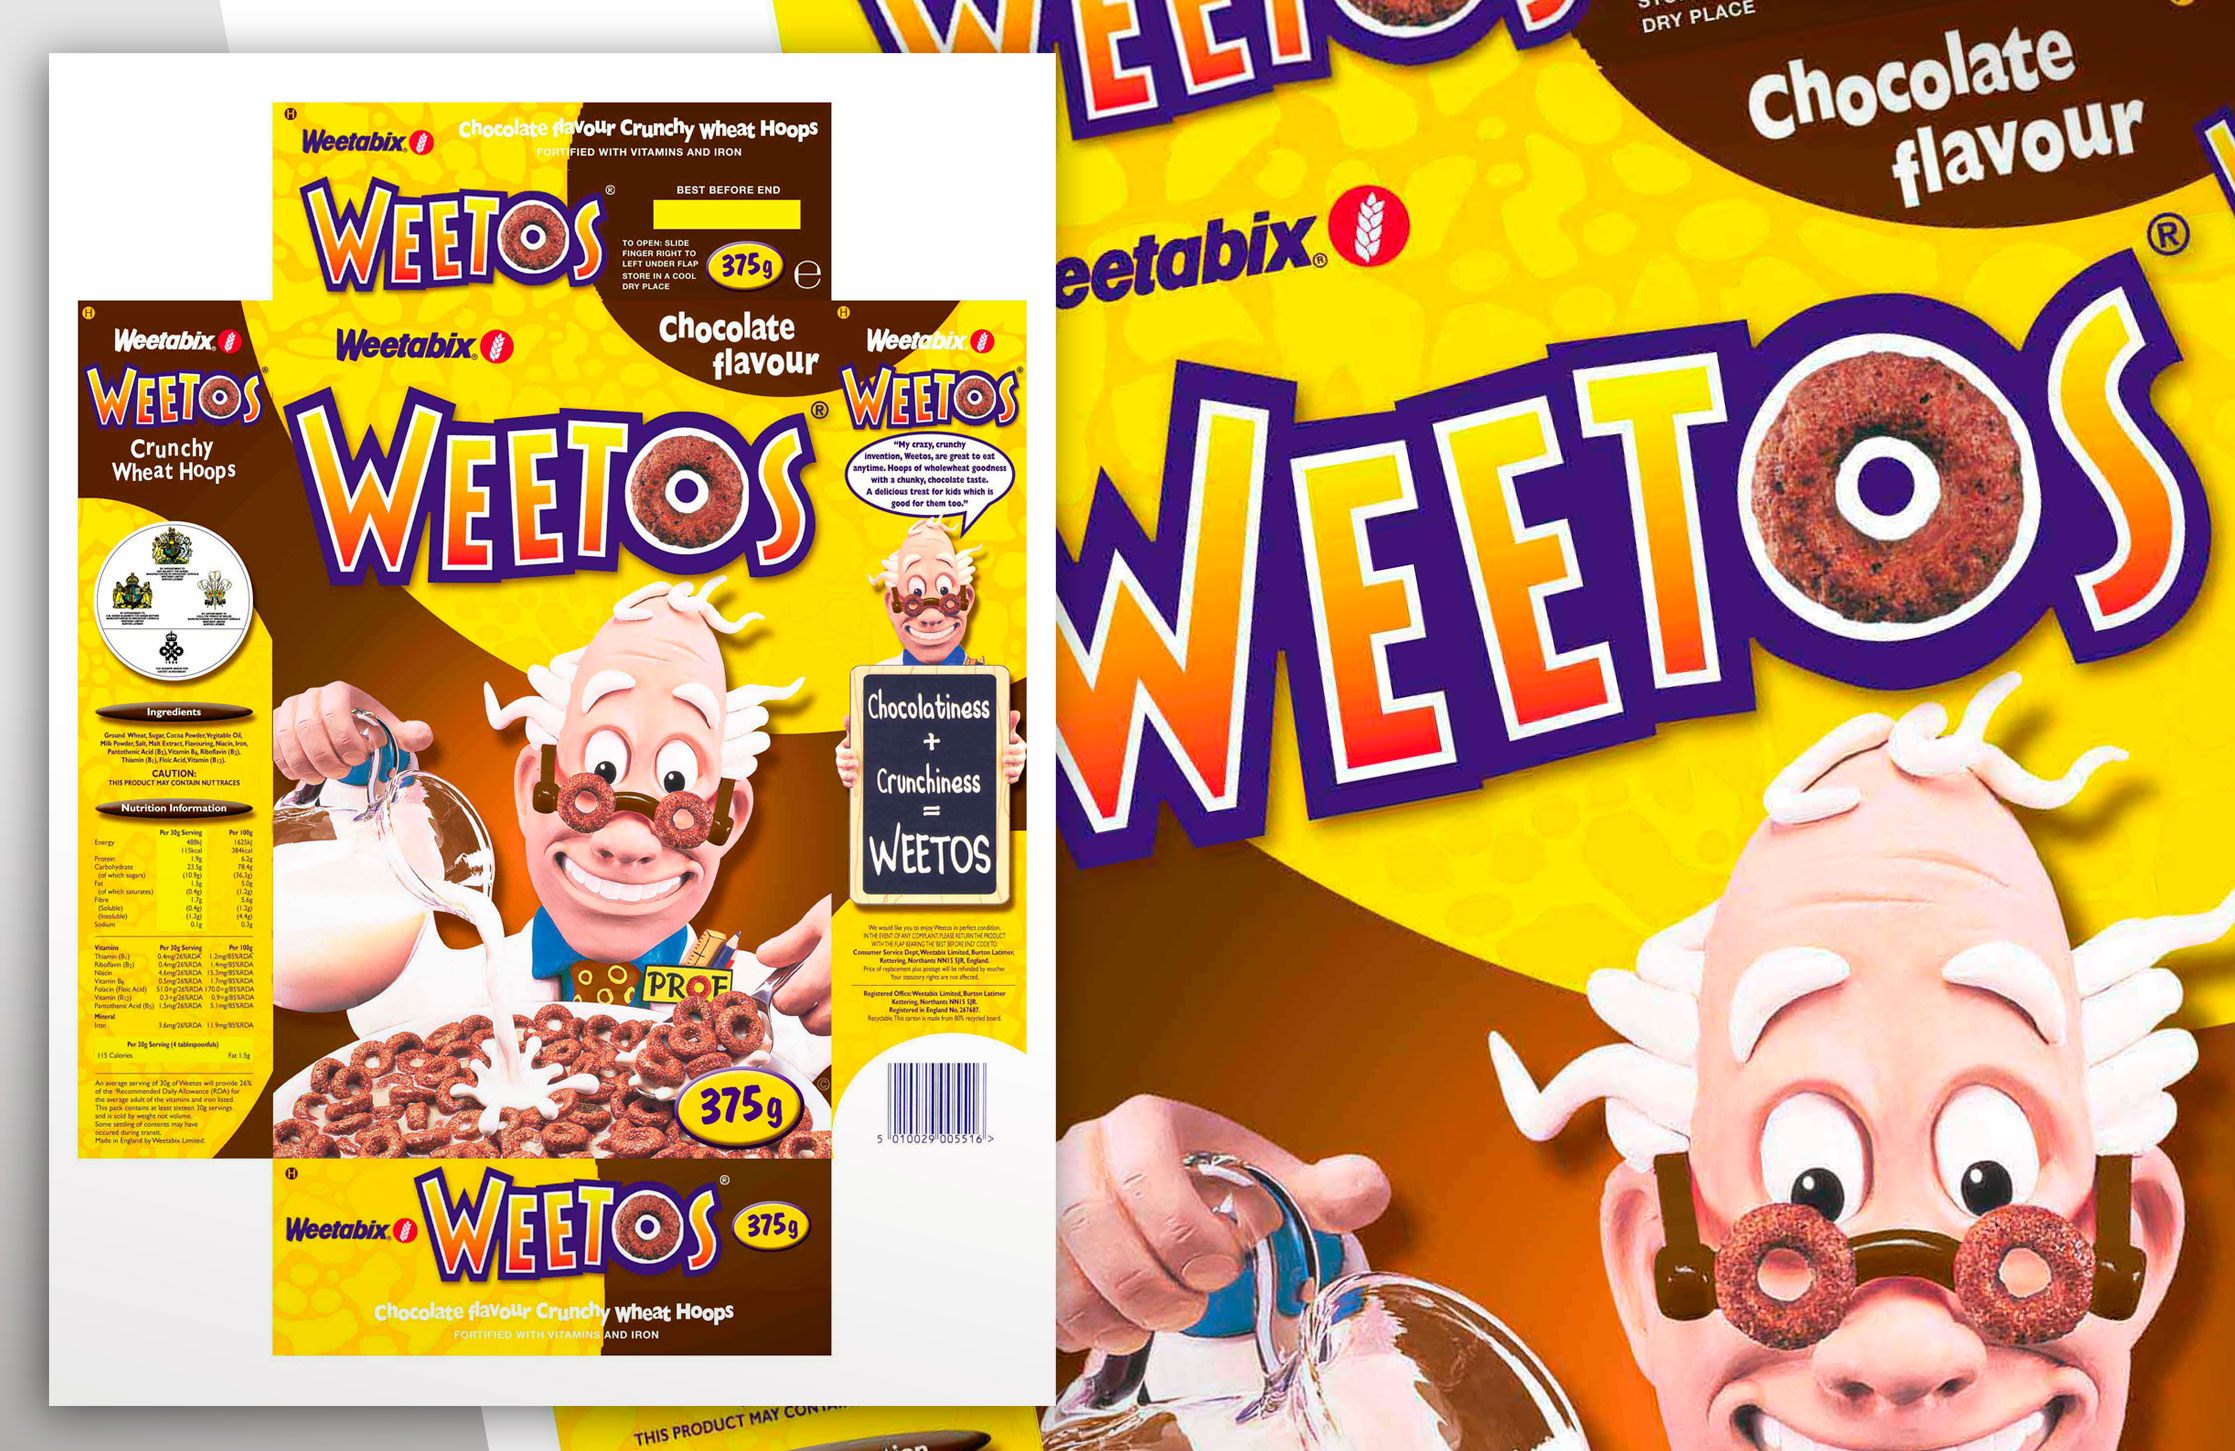 Redesign of on-pack graphics for Weetabix Weetos